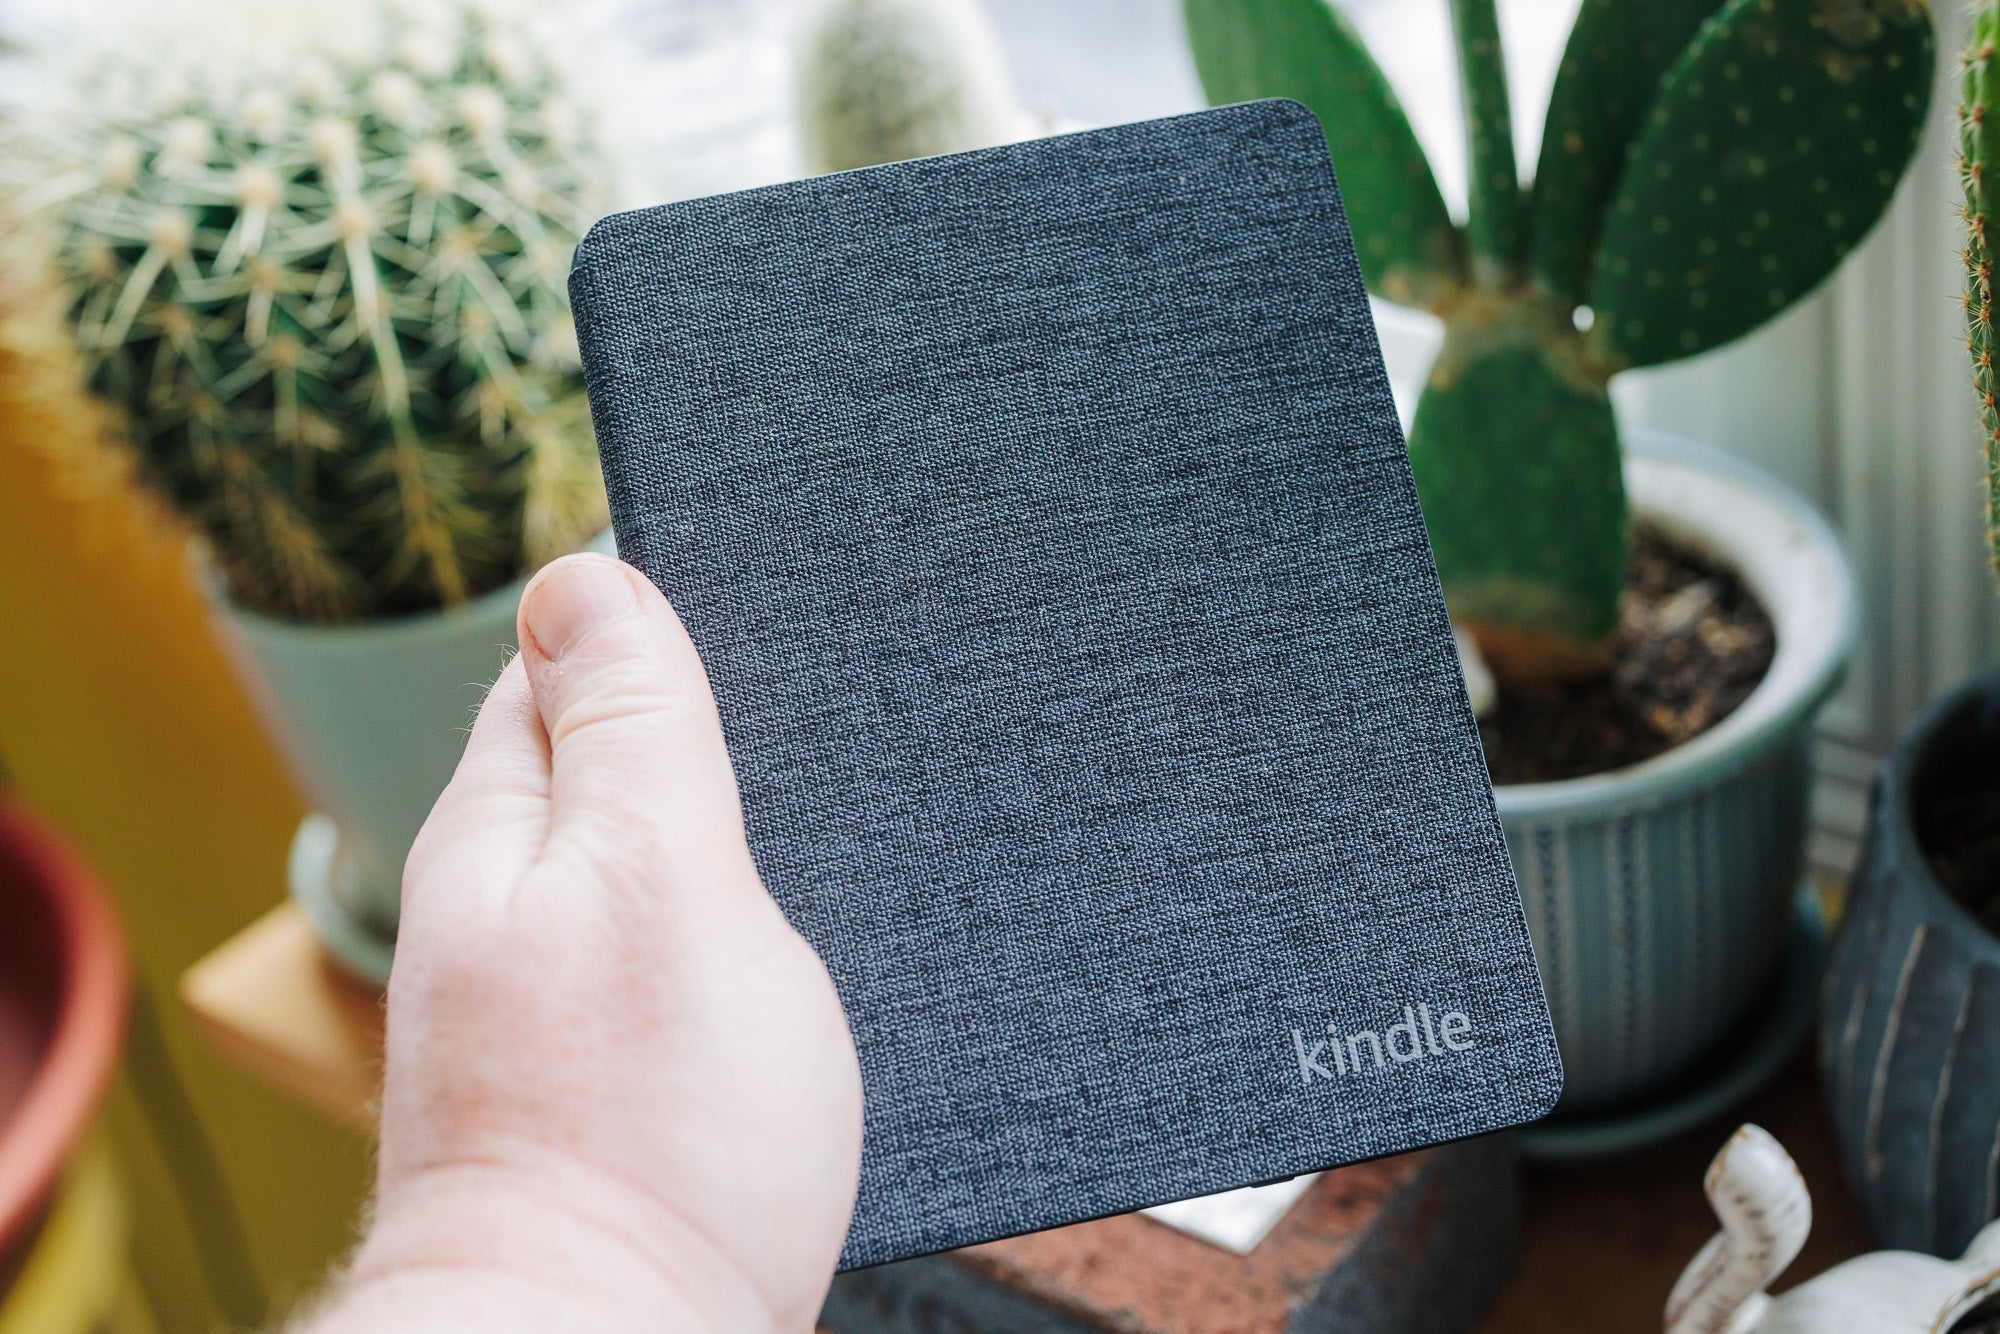 Amazon Kindle Paperwhite with fabric cover